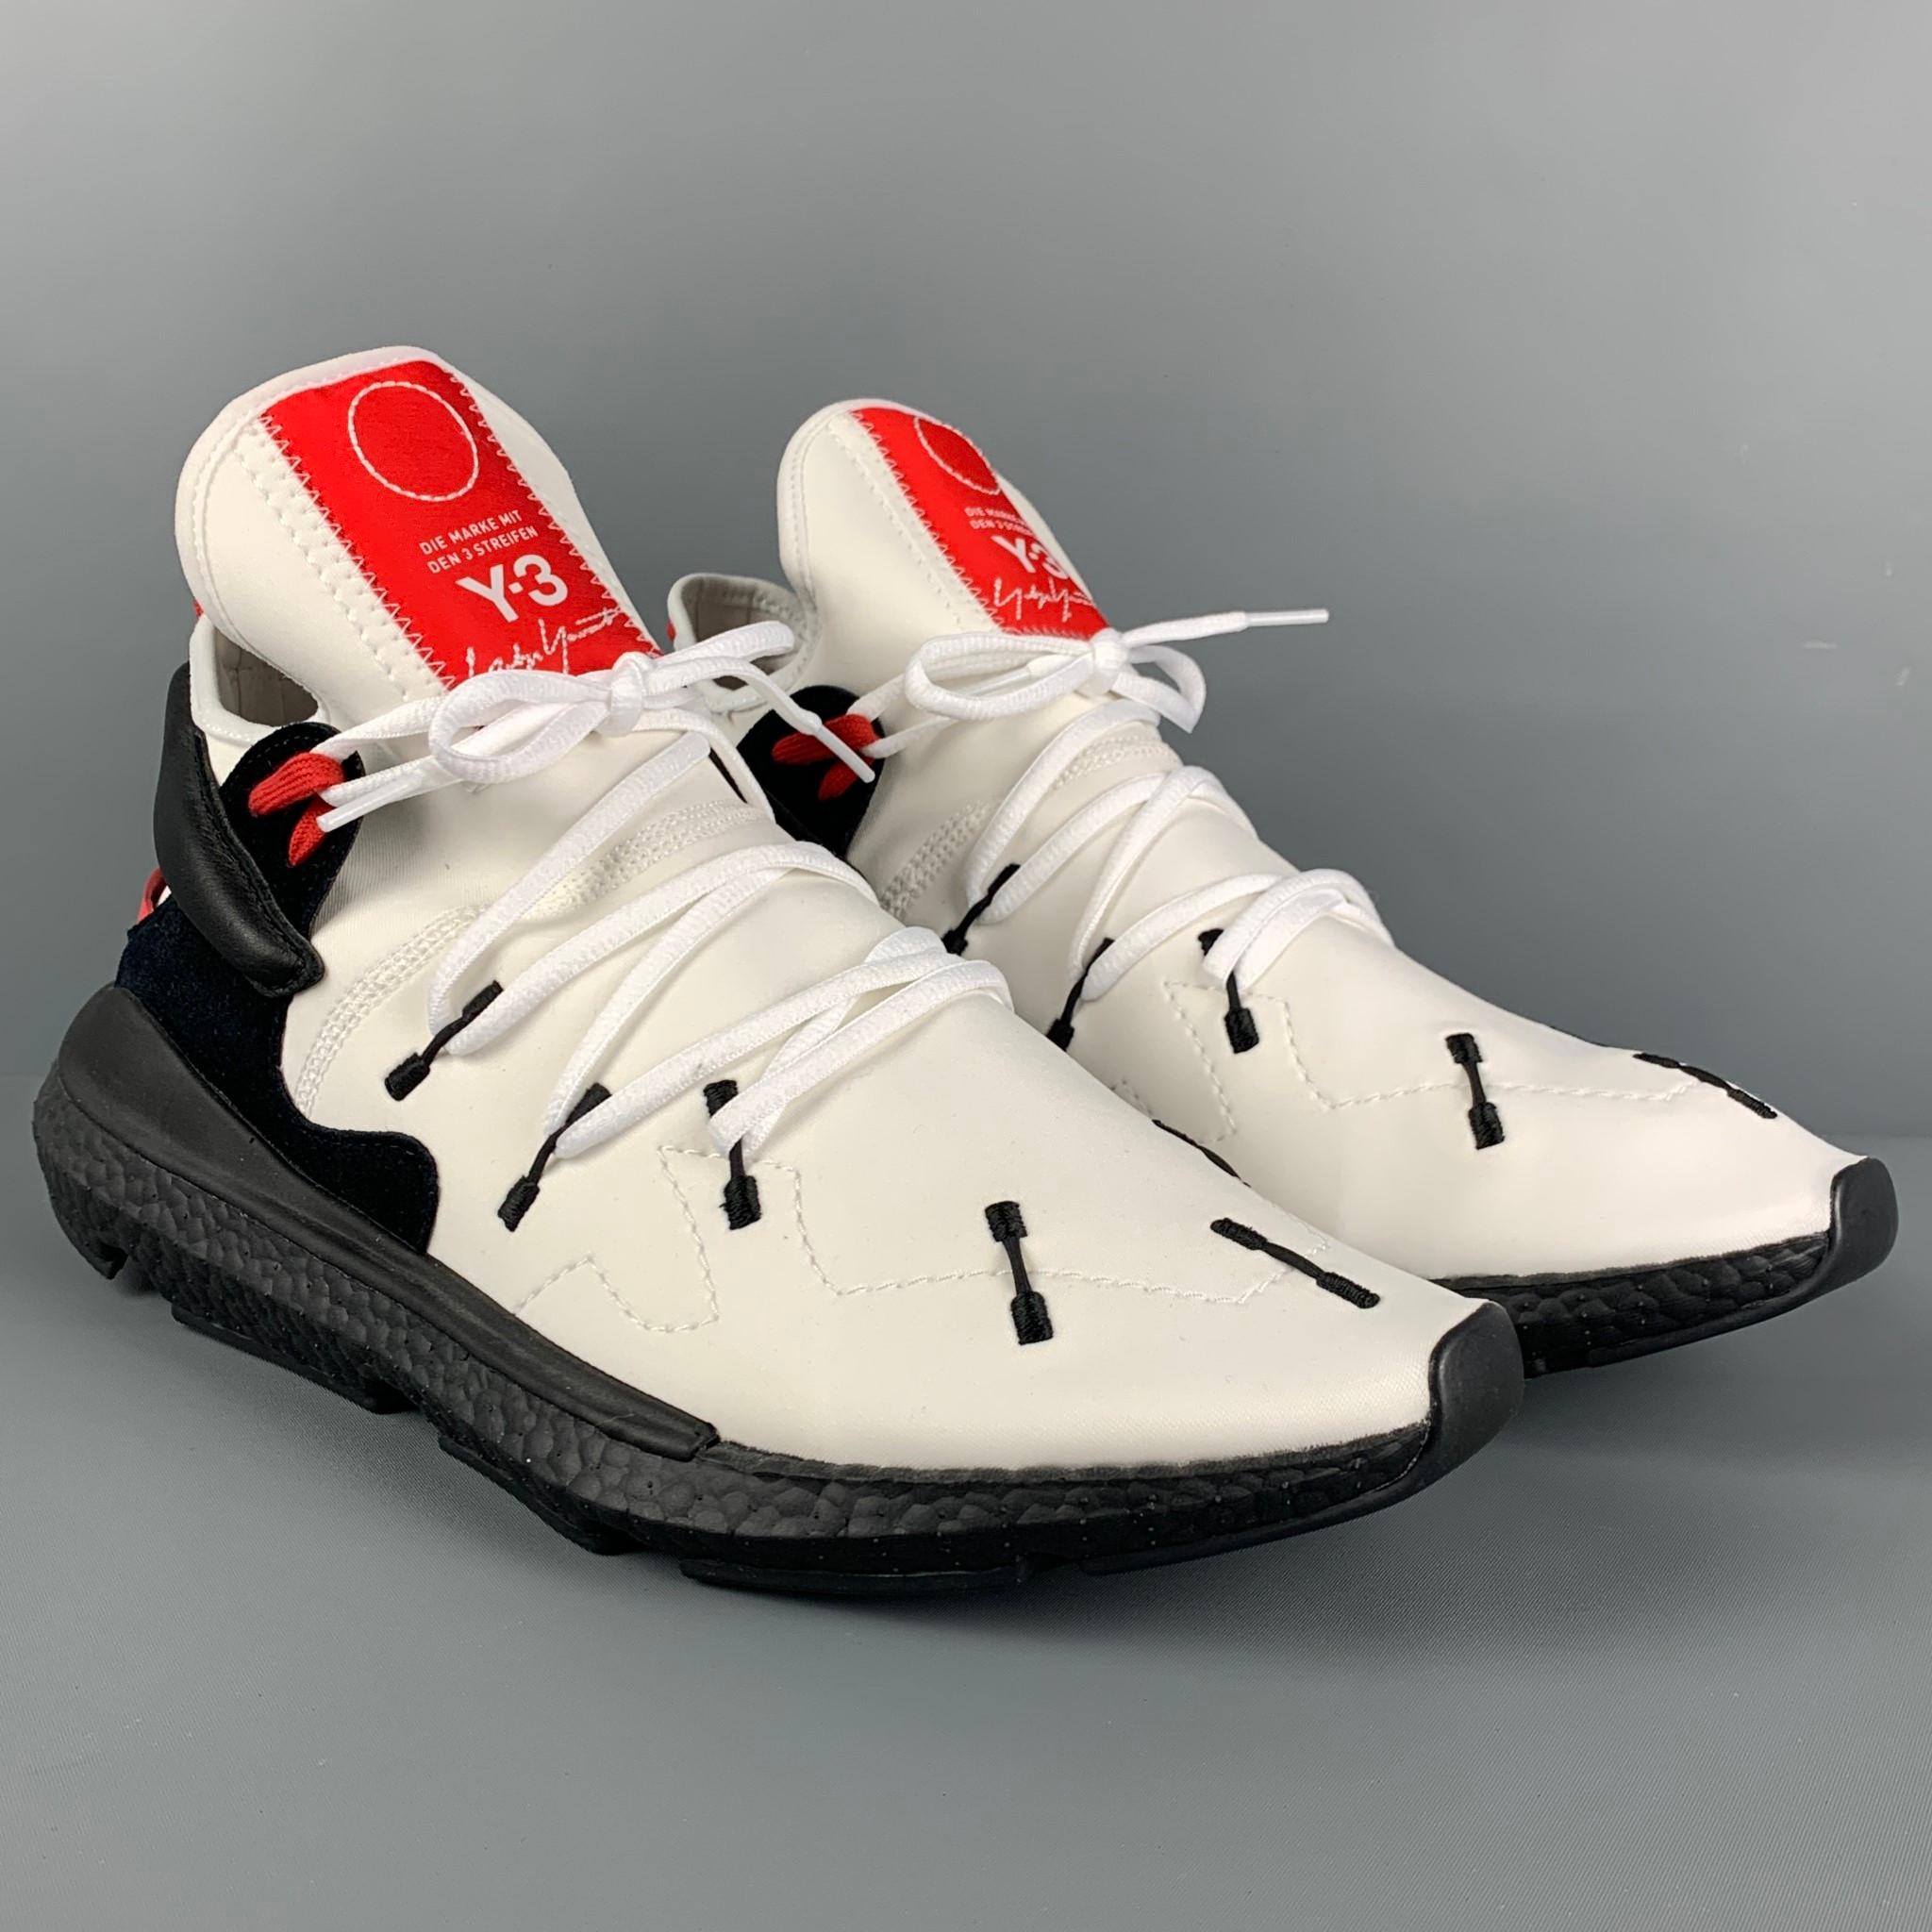 Y-3 by YOHJI YAMAMOTO sneakers comes in white & black mixed materials with a leather trim featuring a rubber sole and a lace up closure. 

New With Box. 
Marked: 12

Outsole: 13 in. x 5 in. 